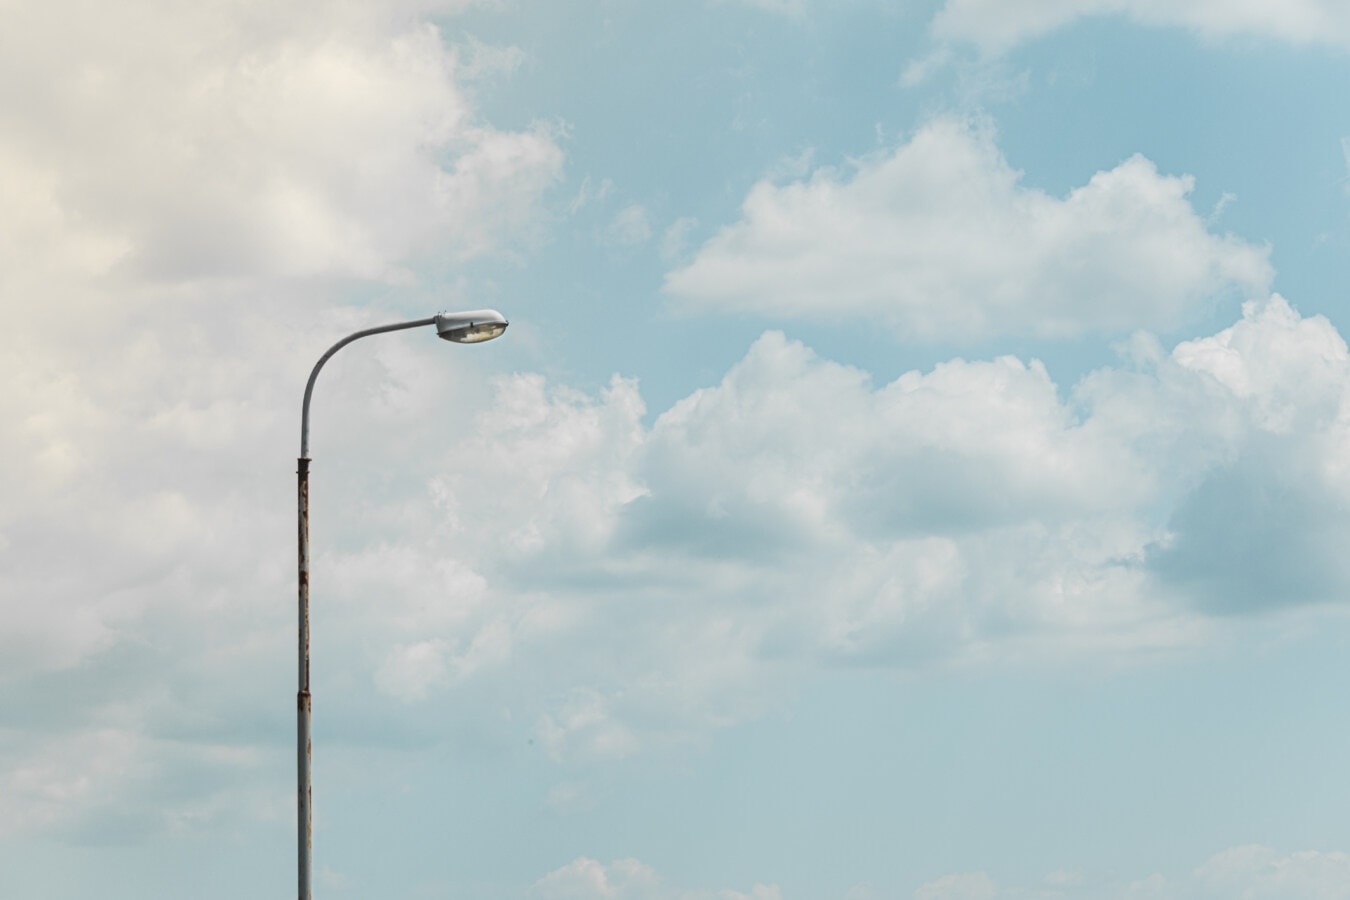 lamp, pole, blue sky, weather, clouds, nature, high, wind, fair weather, outdoors